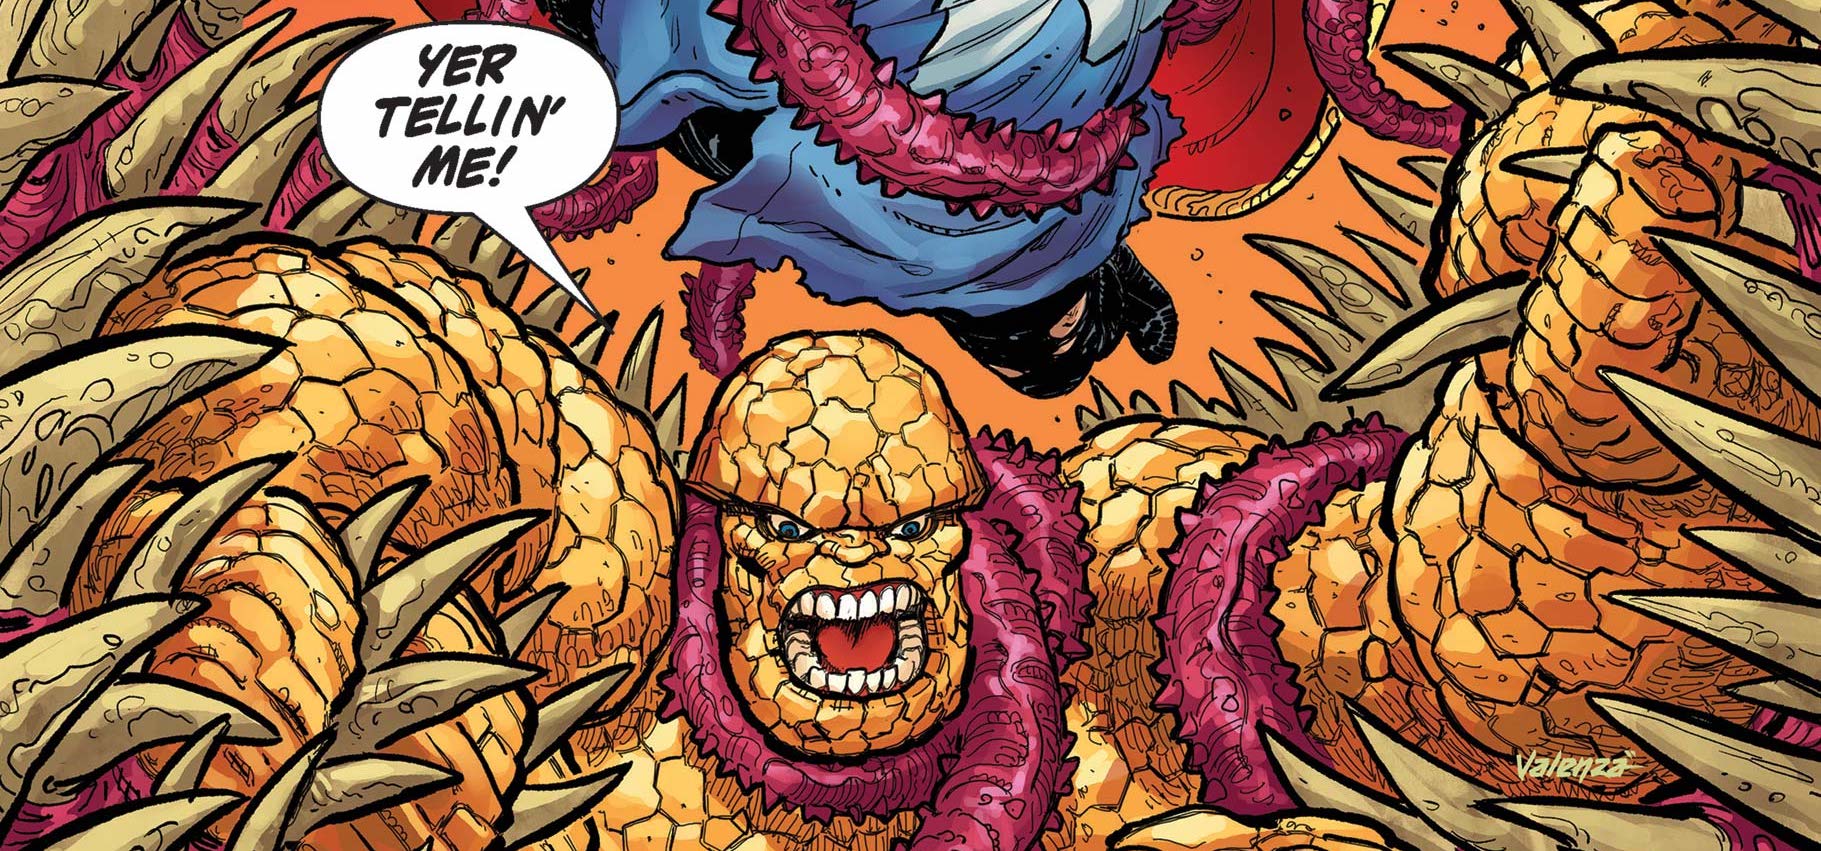 ‘Clobberin’ Time’ #3 stands out with good action and fun adventure